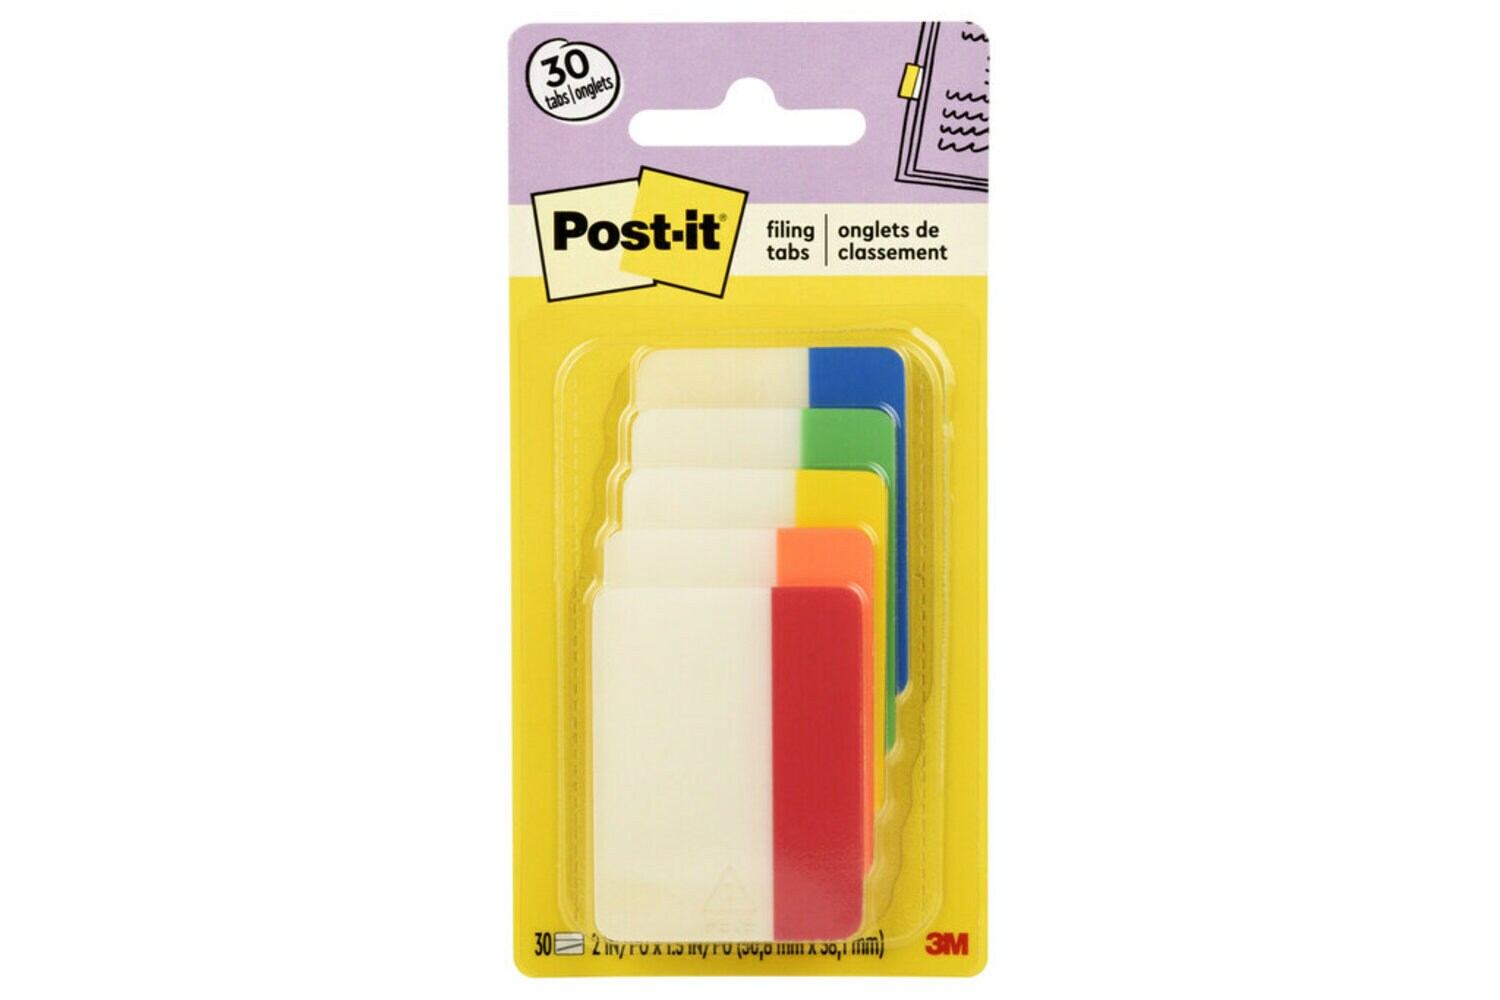 7010372361 - Post-it Tabs 686-ROYGB, 2 in. x 1.5 in. (50,8 mm x 38,1 mm)